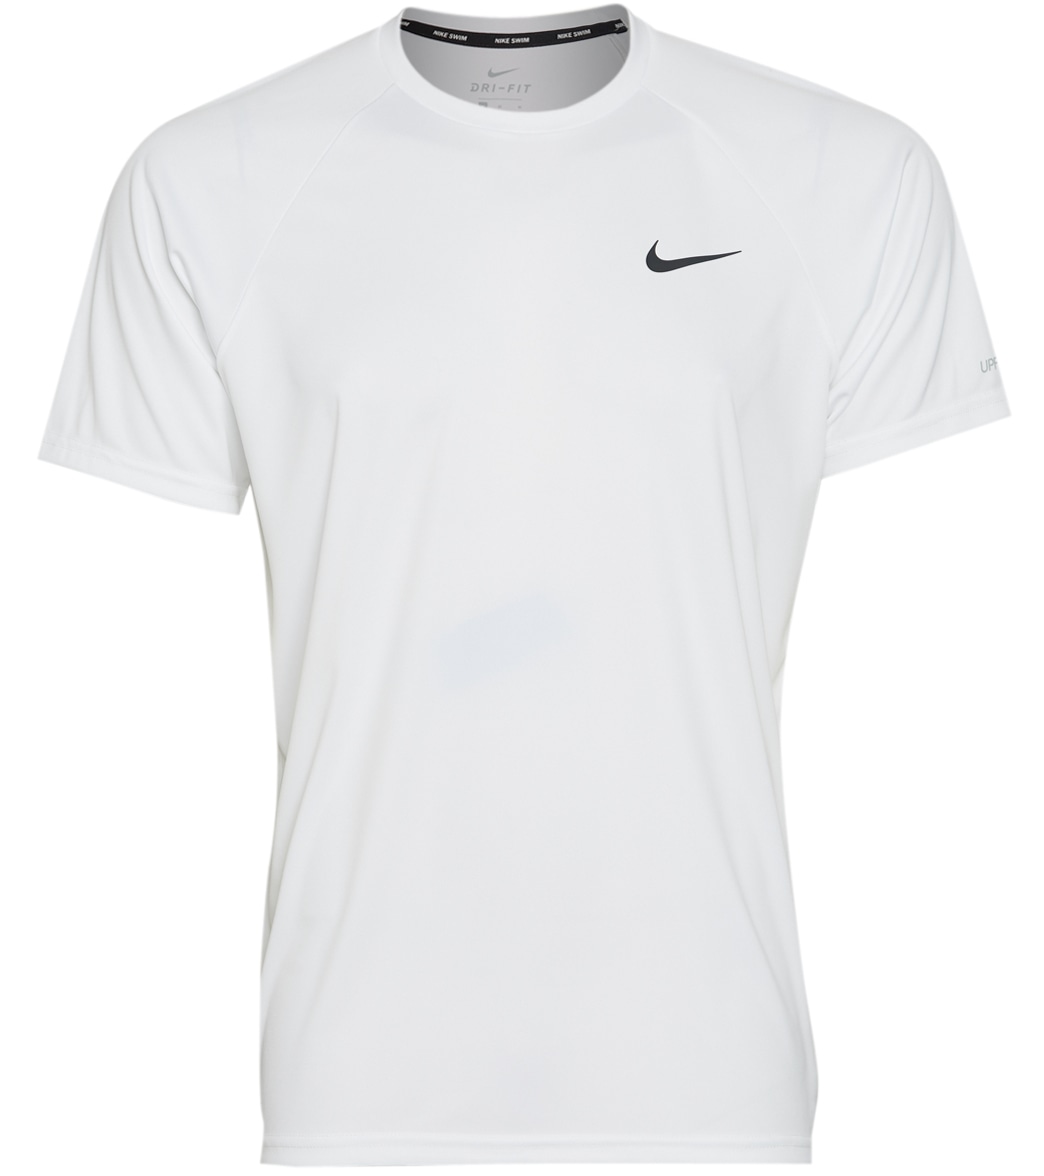 Nike Men's Essential Short Sleeve Hydroguard Shirt - White Large Polyester - Swimoutlet.com